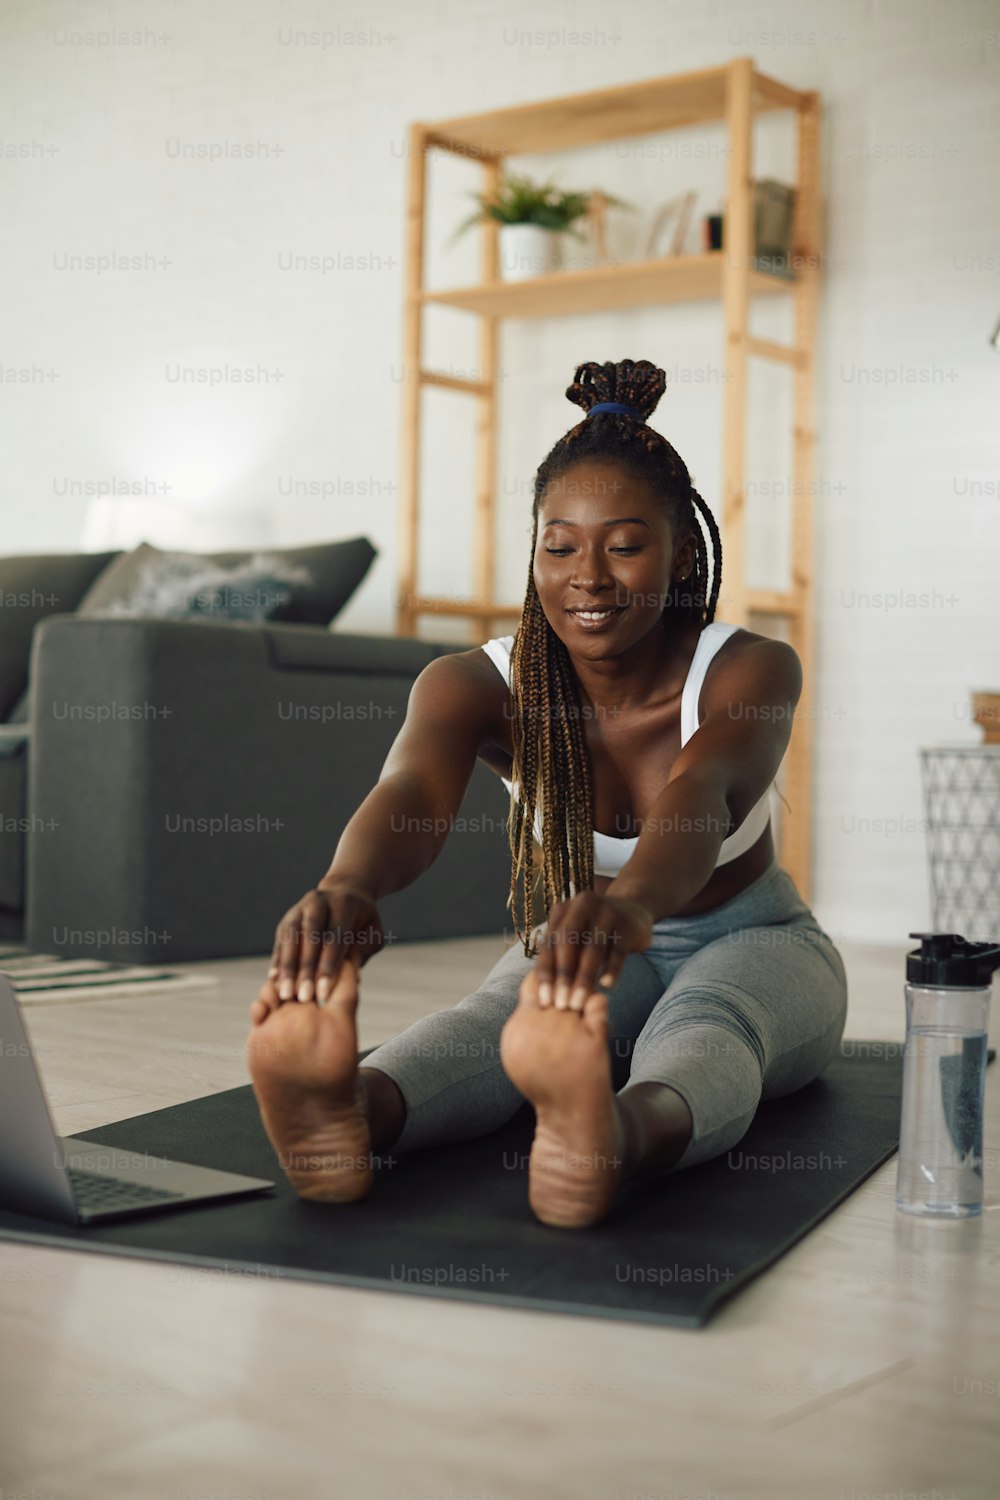 Young black female athlete warming up while doing stretching exercises during home workout.